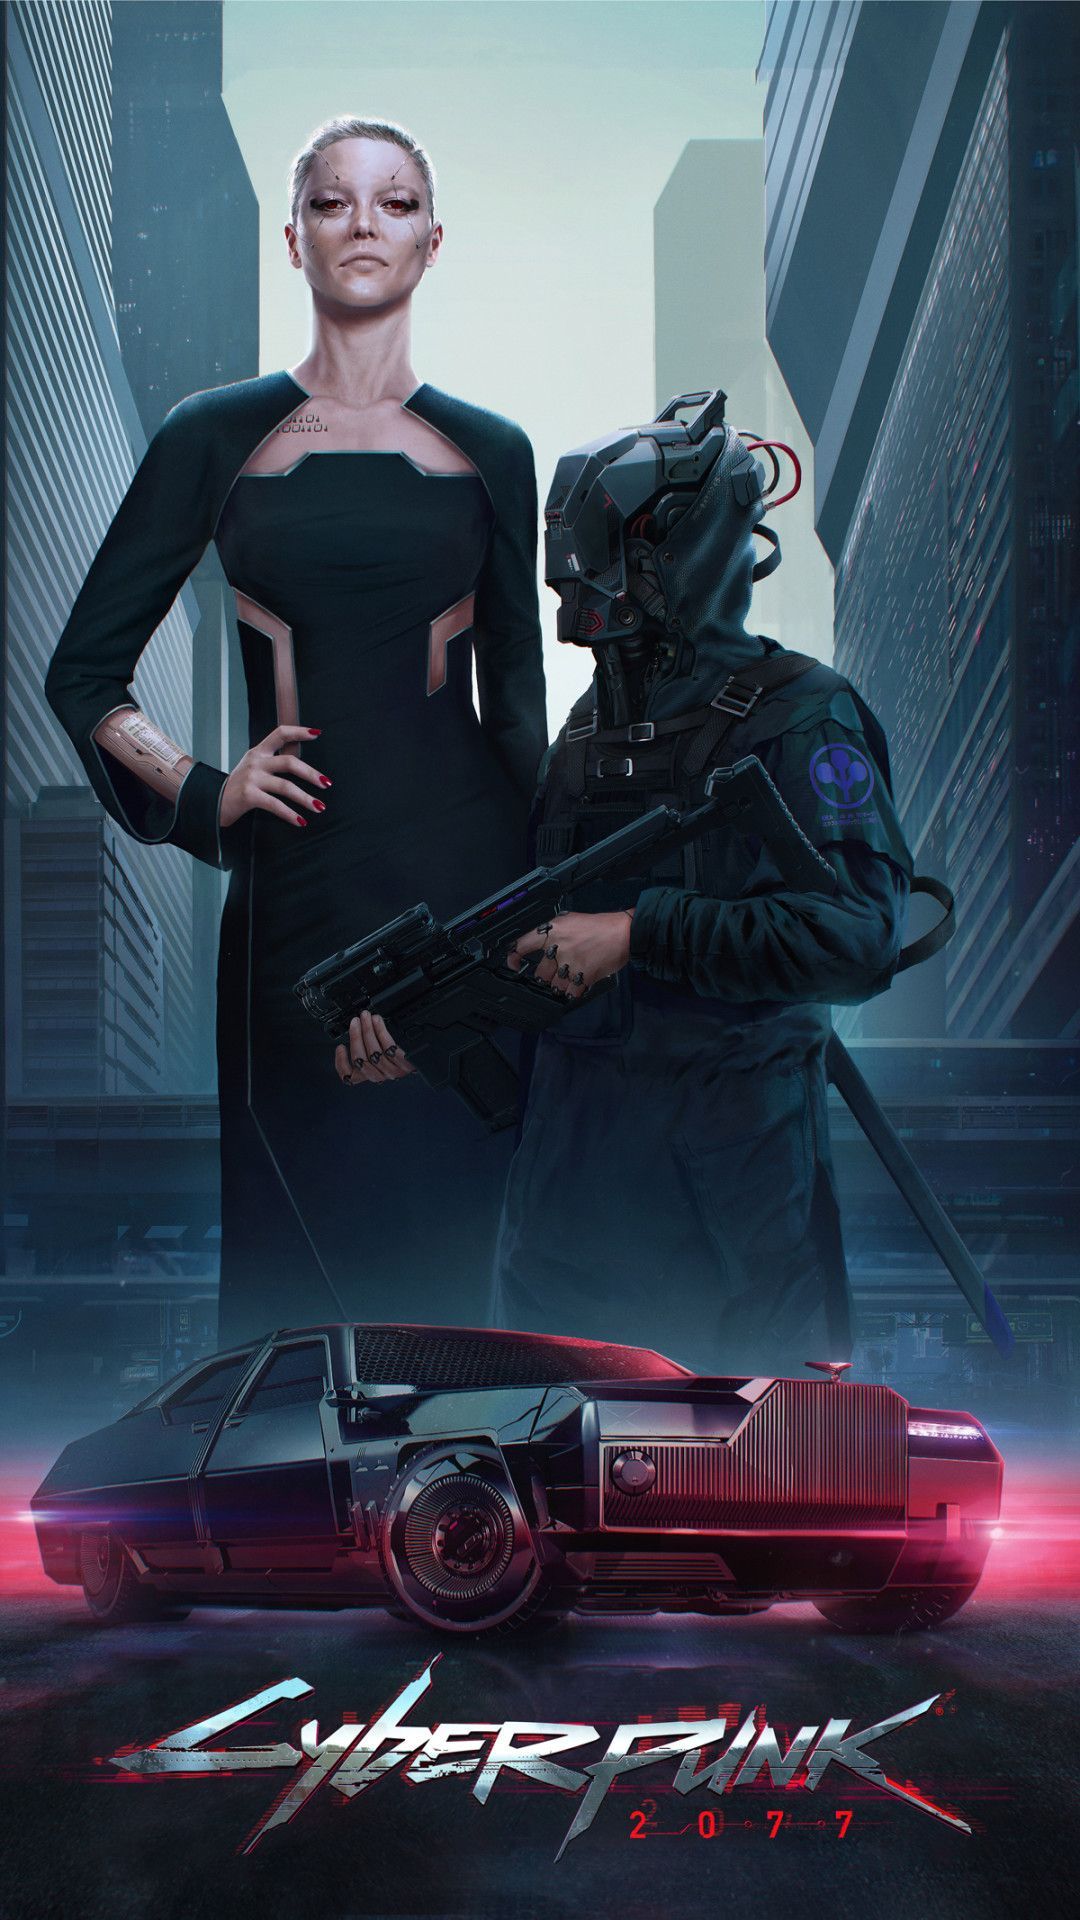 Cyberpunk 2077 2019 Poster 4k Mobile Wallpaper iPhone, Android